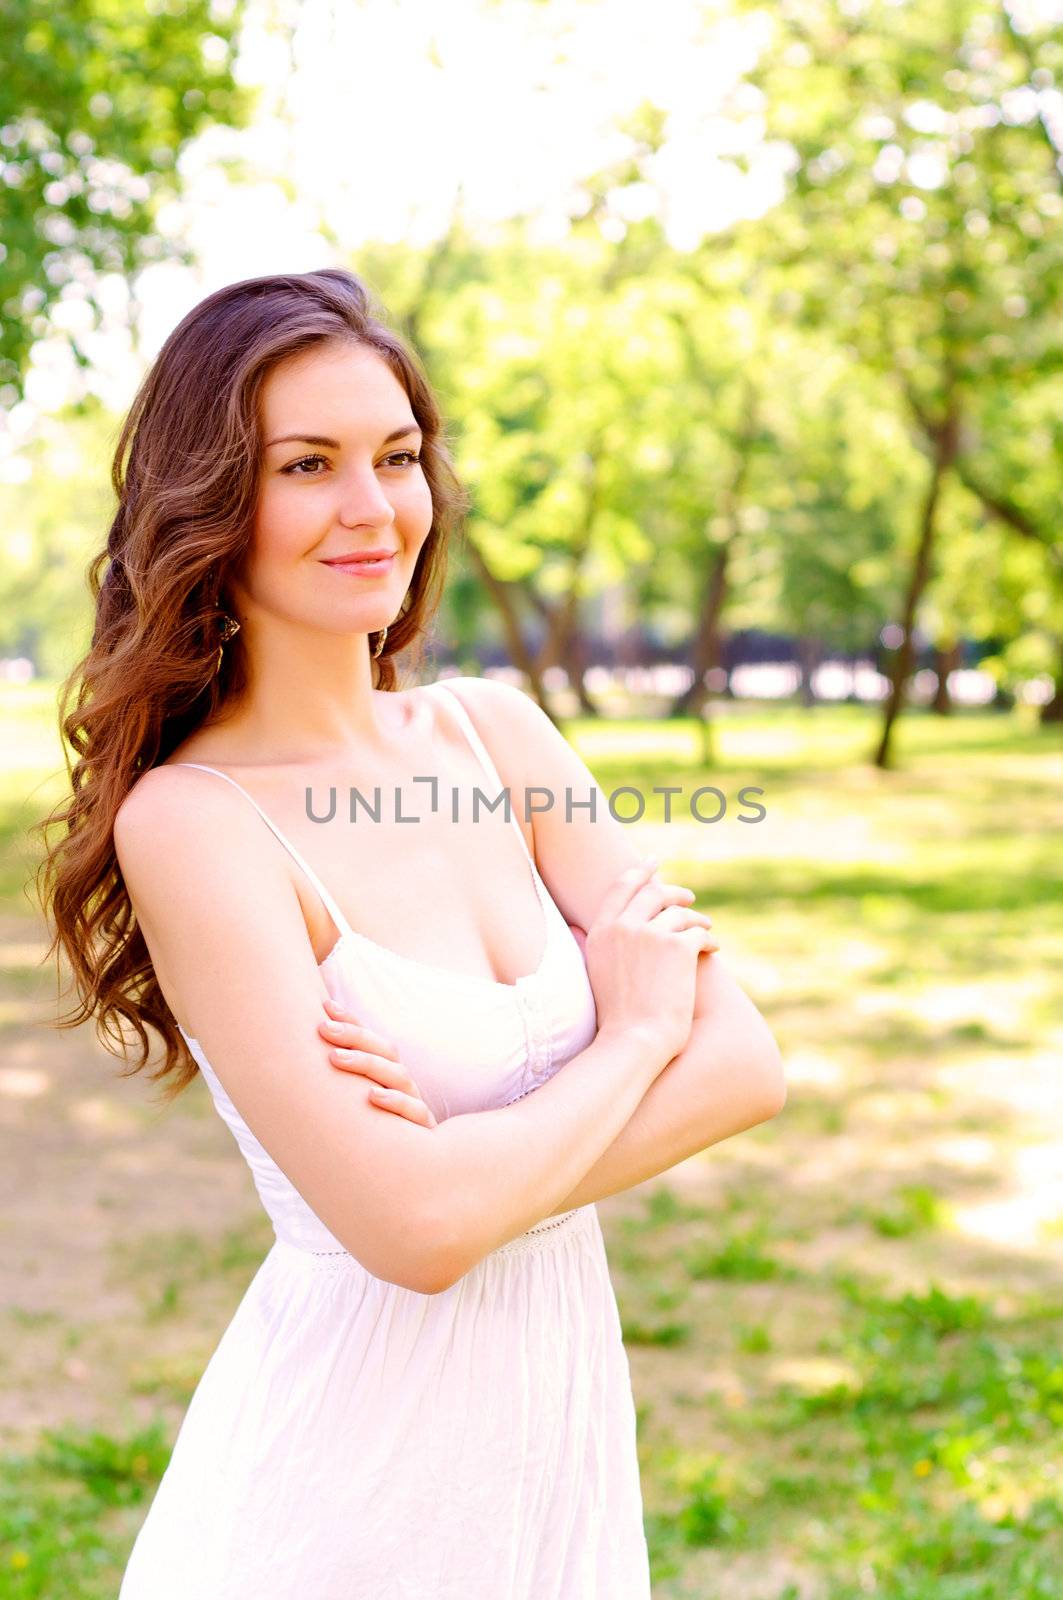 Portrait of an attractive woman in the park, crossed her arms and smile